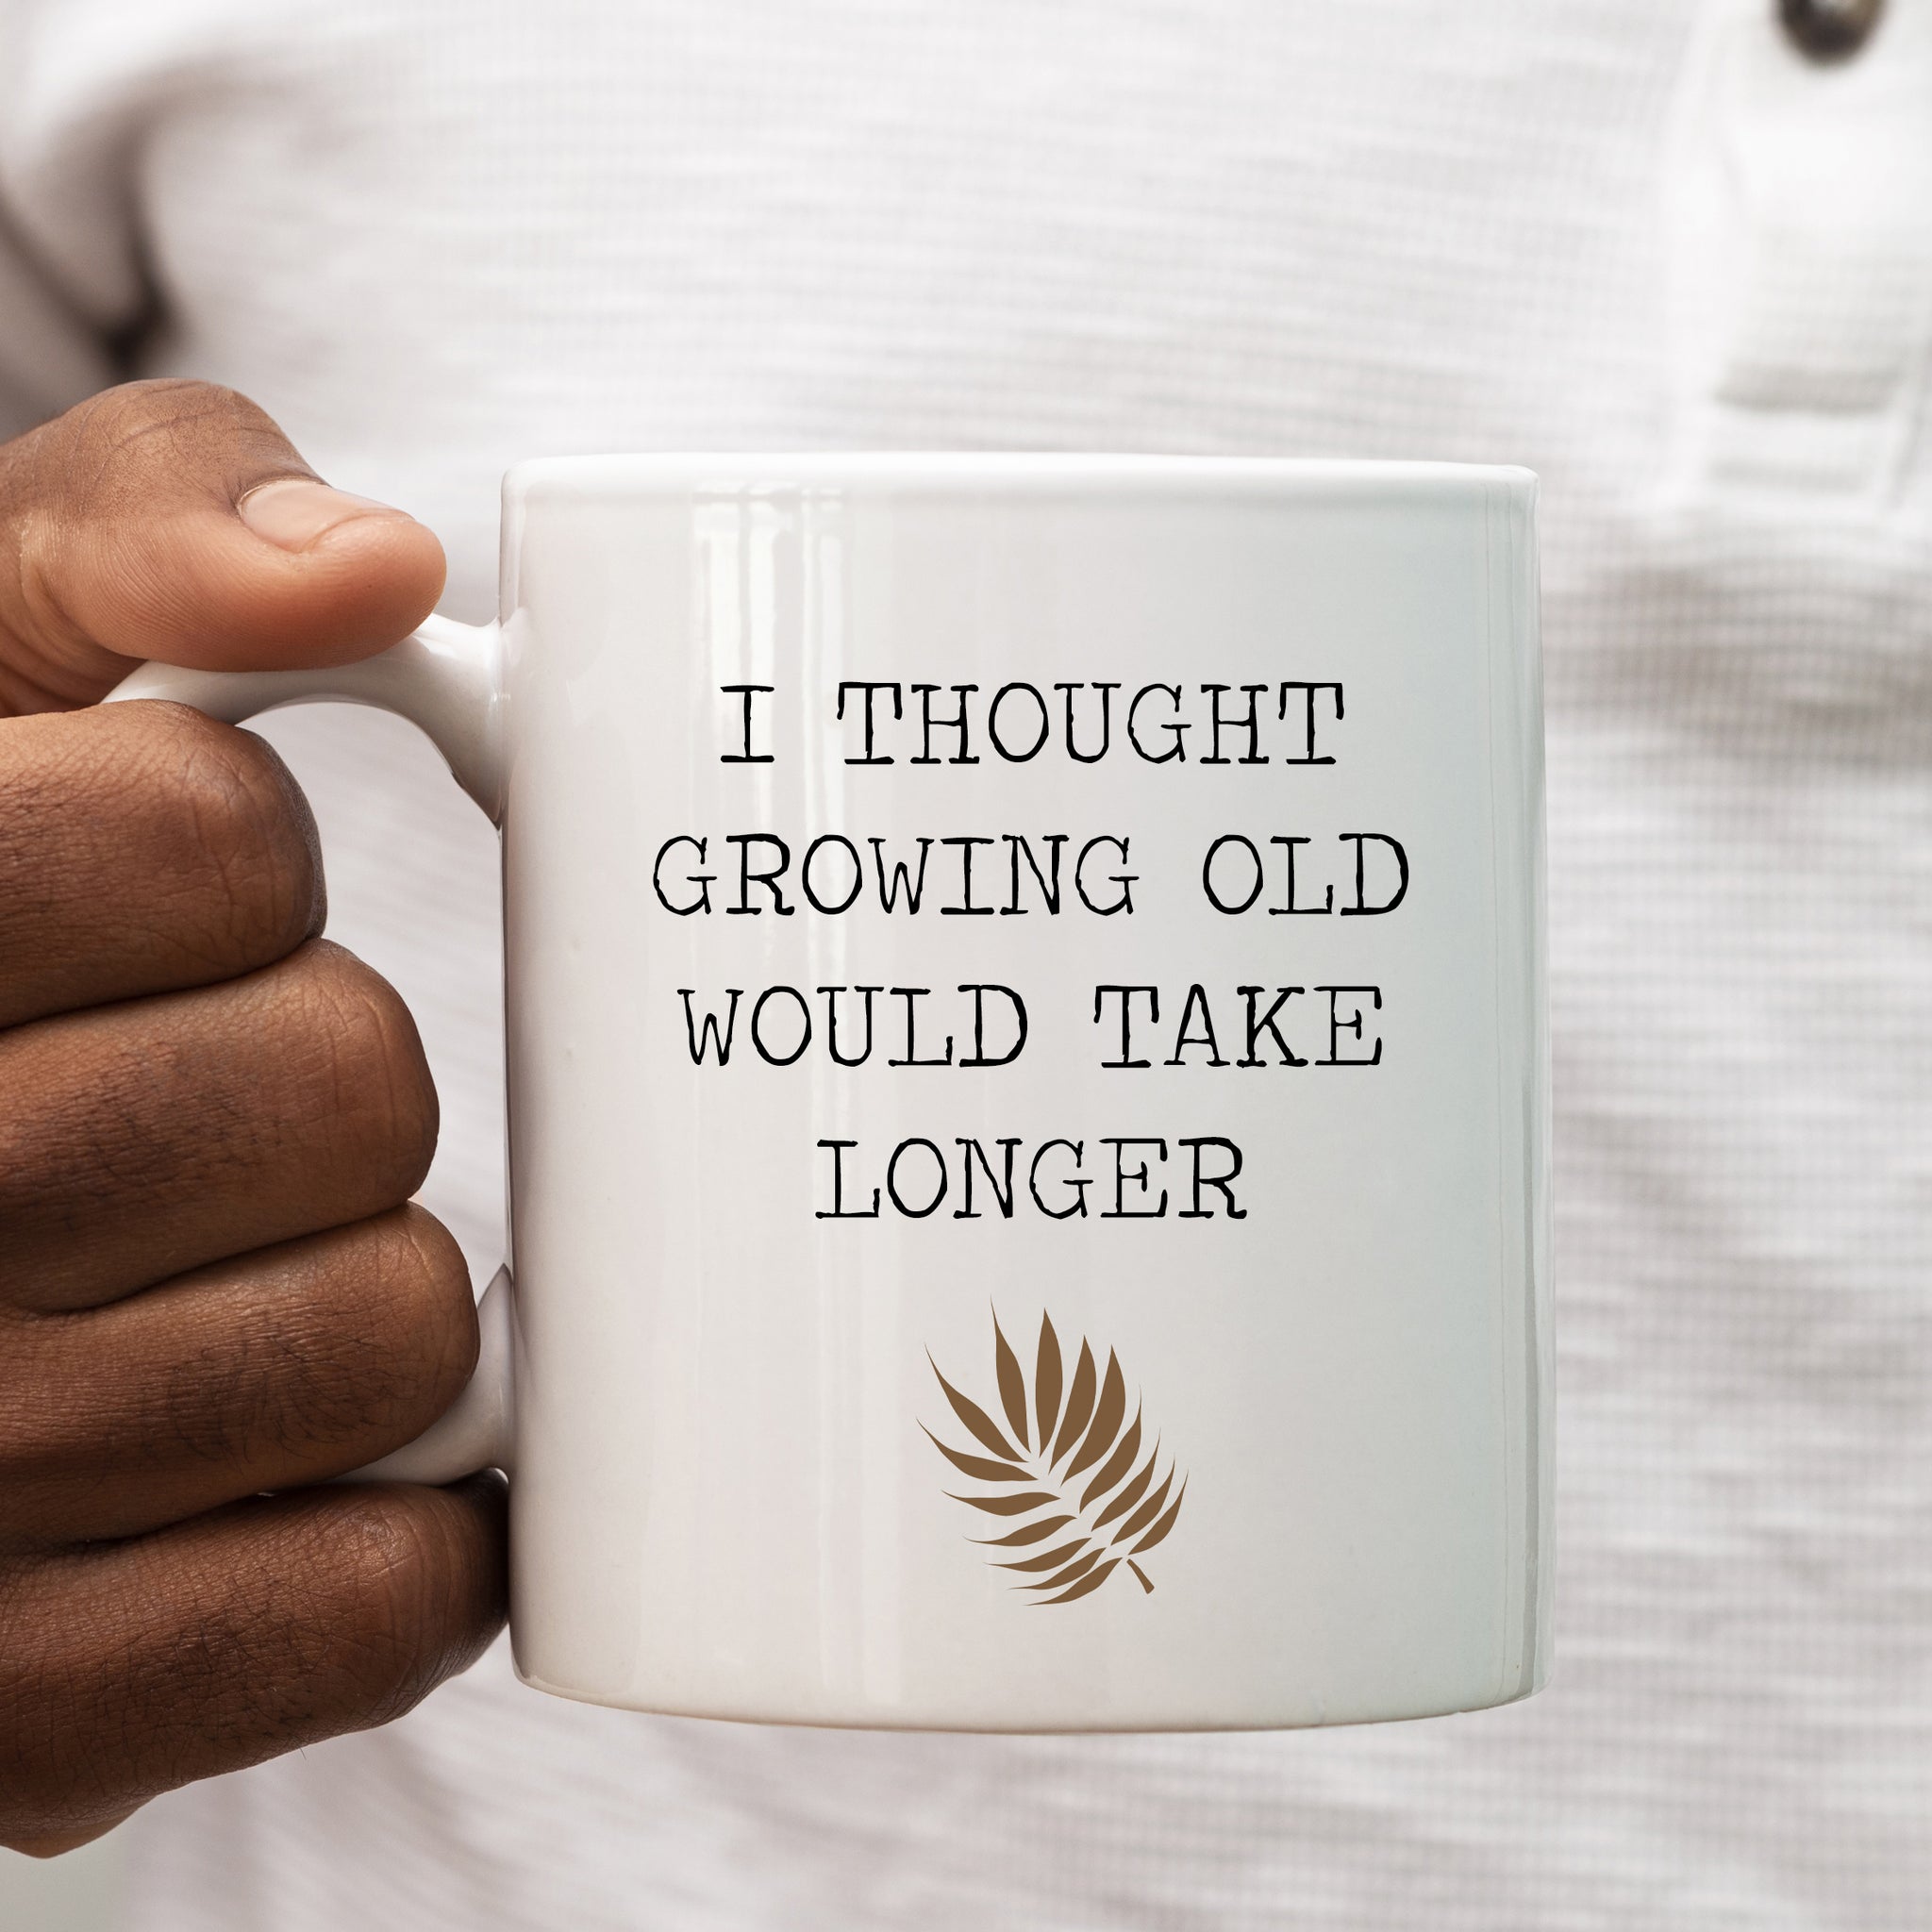 I Thought Growing Old Would Take Longer Mug, Funny Quote Birthday Cup